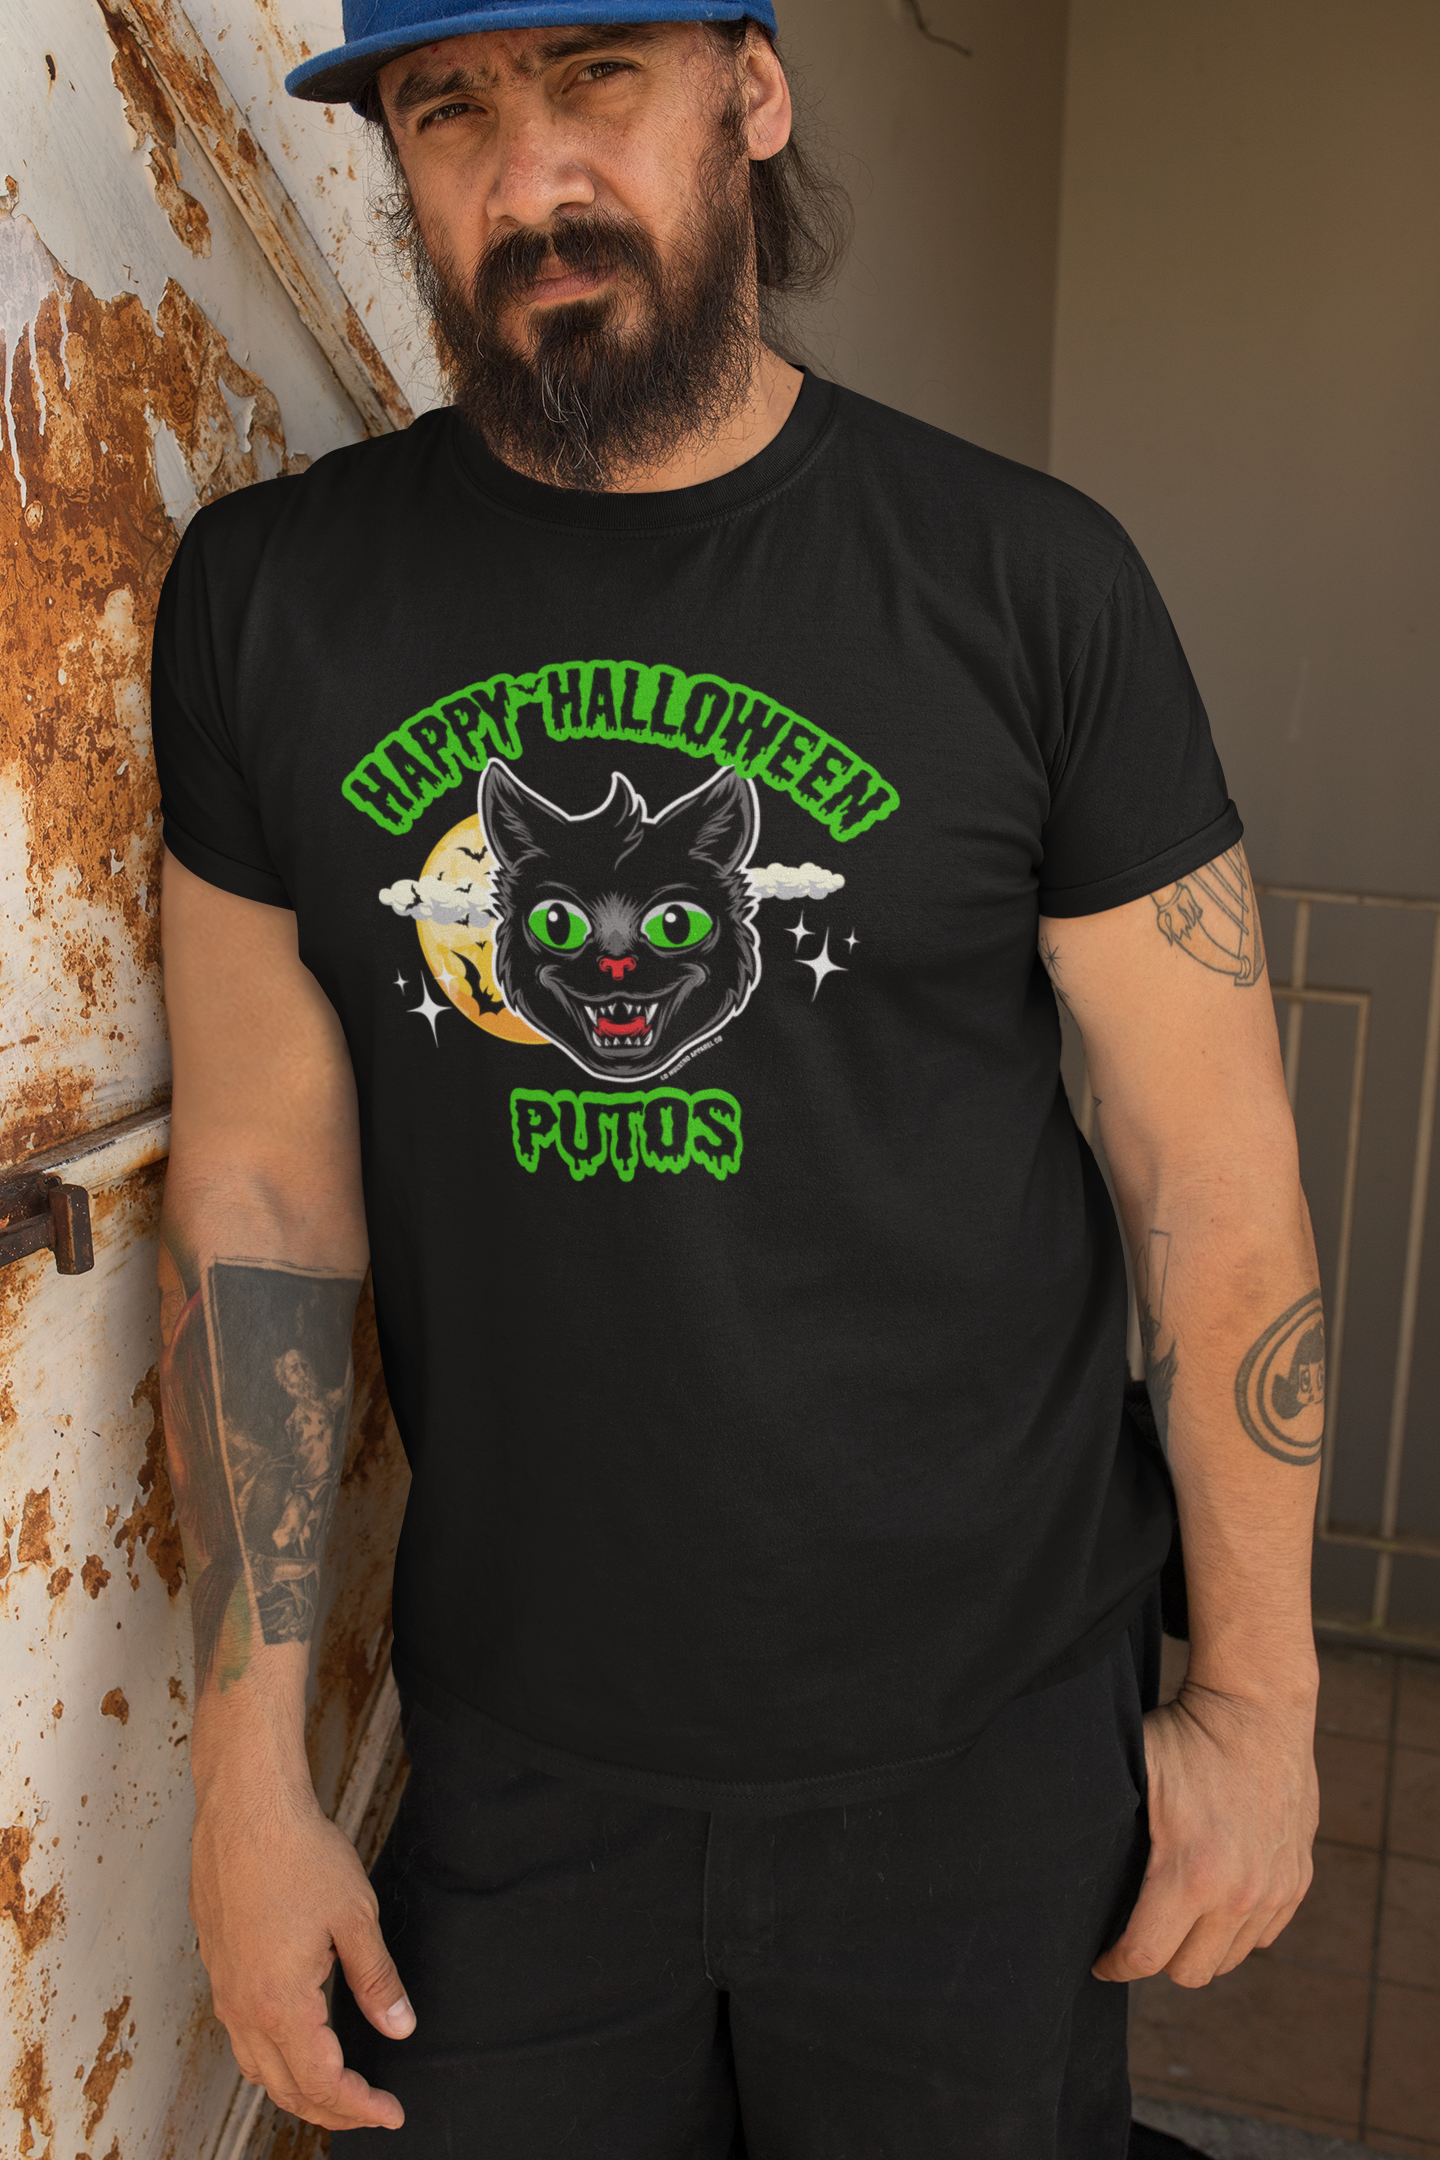 Man wearing Happy Halloween Putos Men's T-Shirt with black cat graphic leaning against a rusty wall – Funny Halloween T-Shirt, Halloween Graphic Tee, Stylish Halloween Wear.